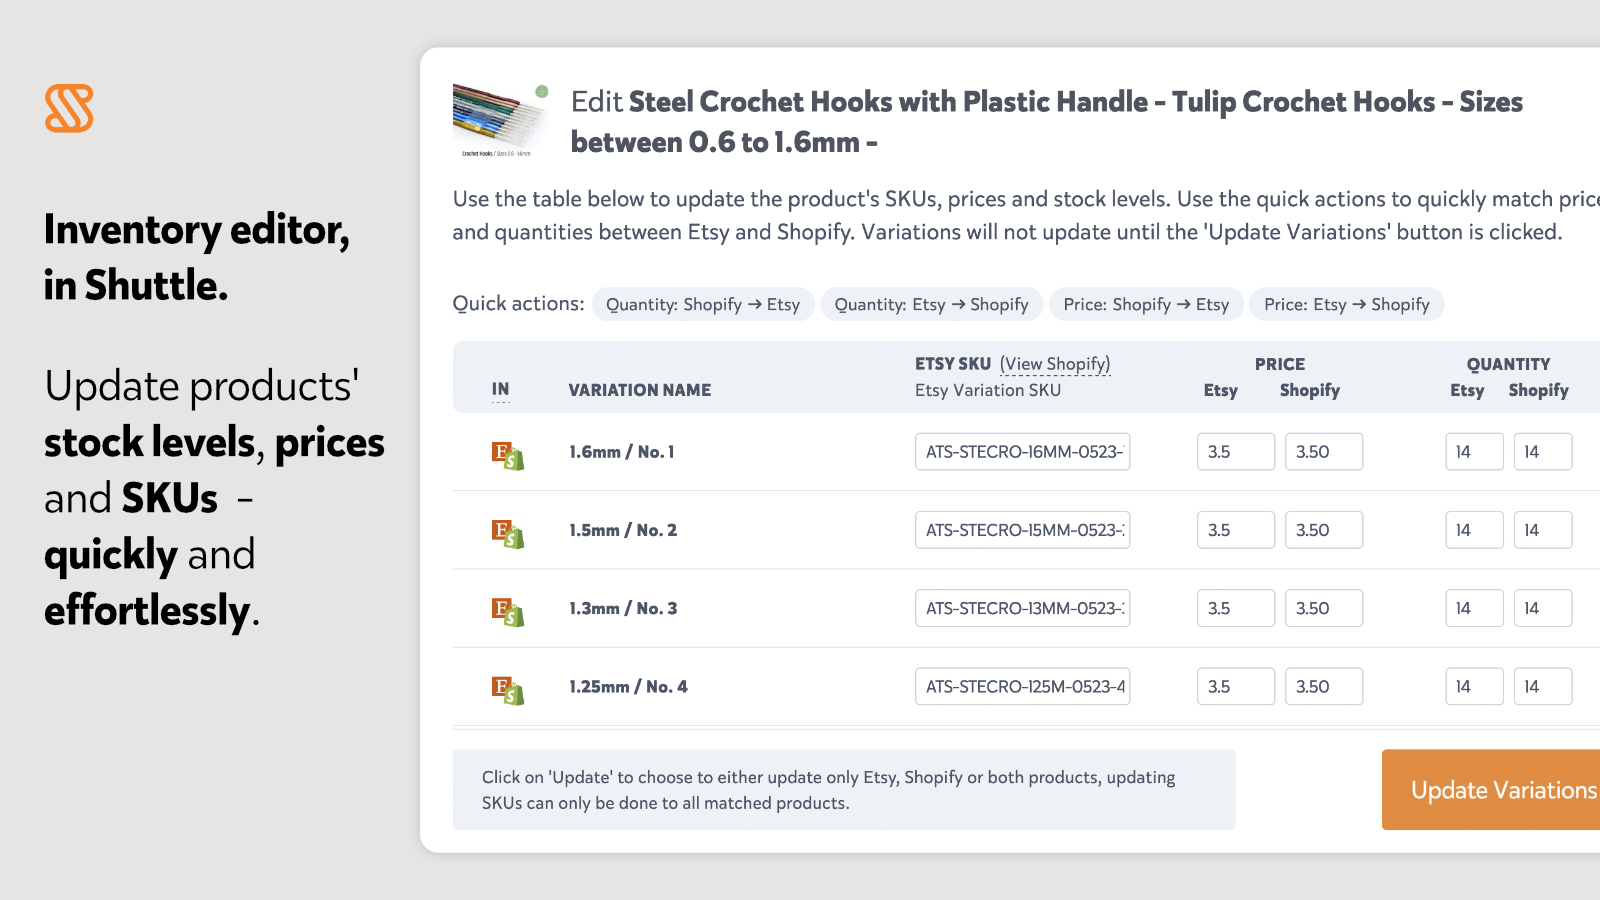 Easily update products' stock levels, prices  and SKUs